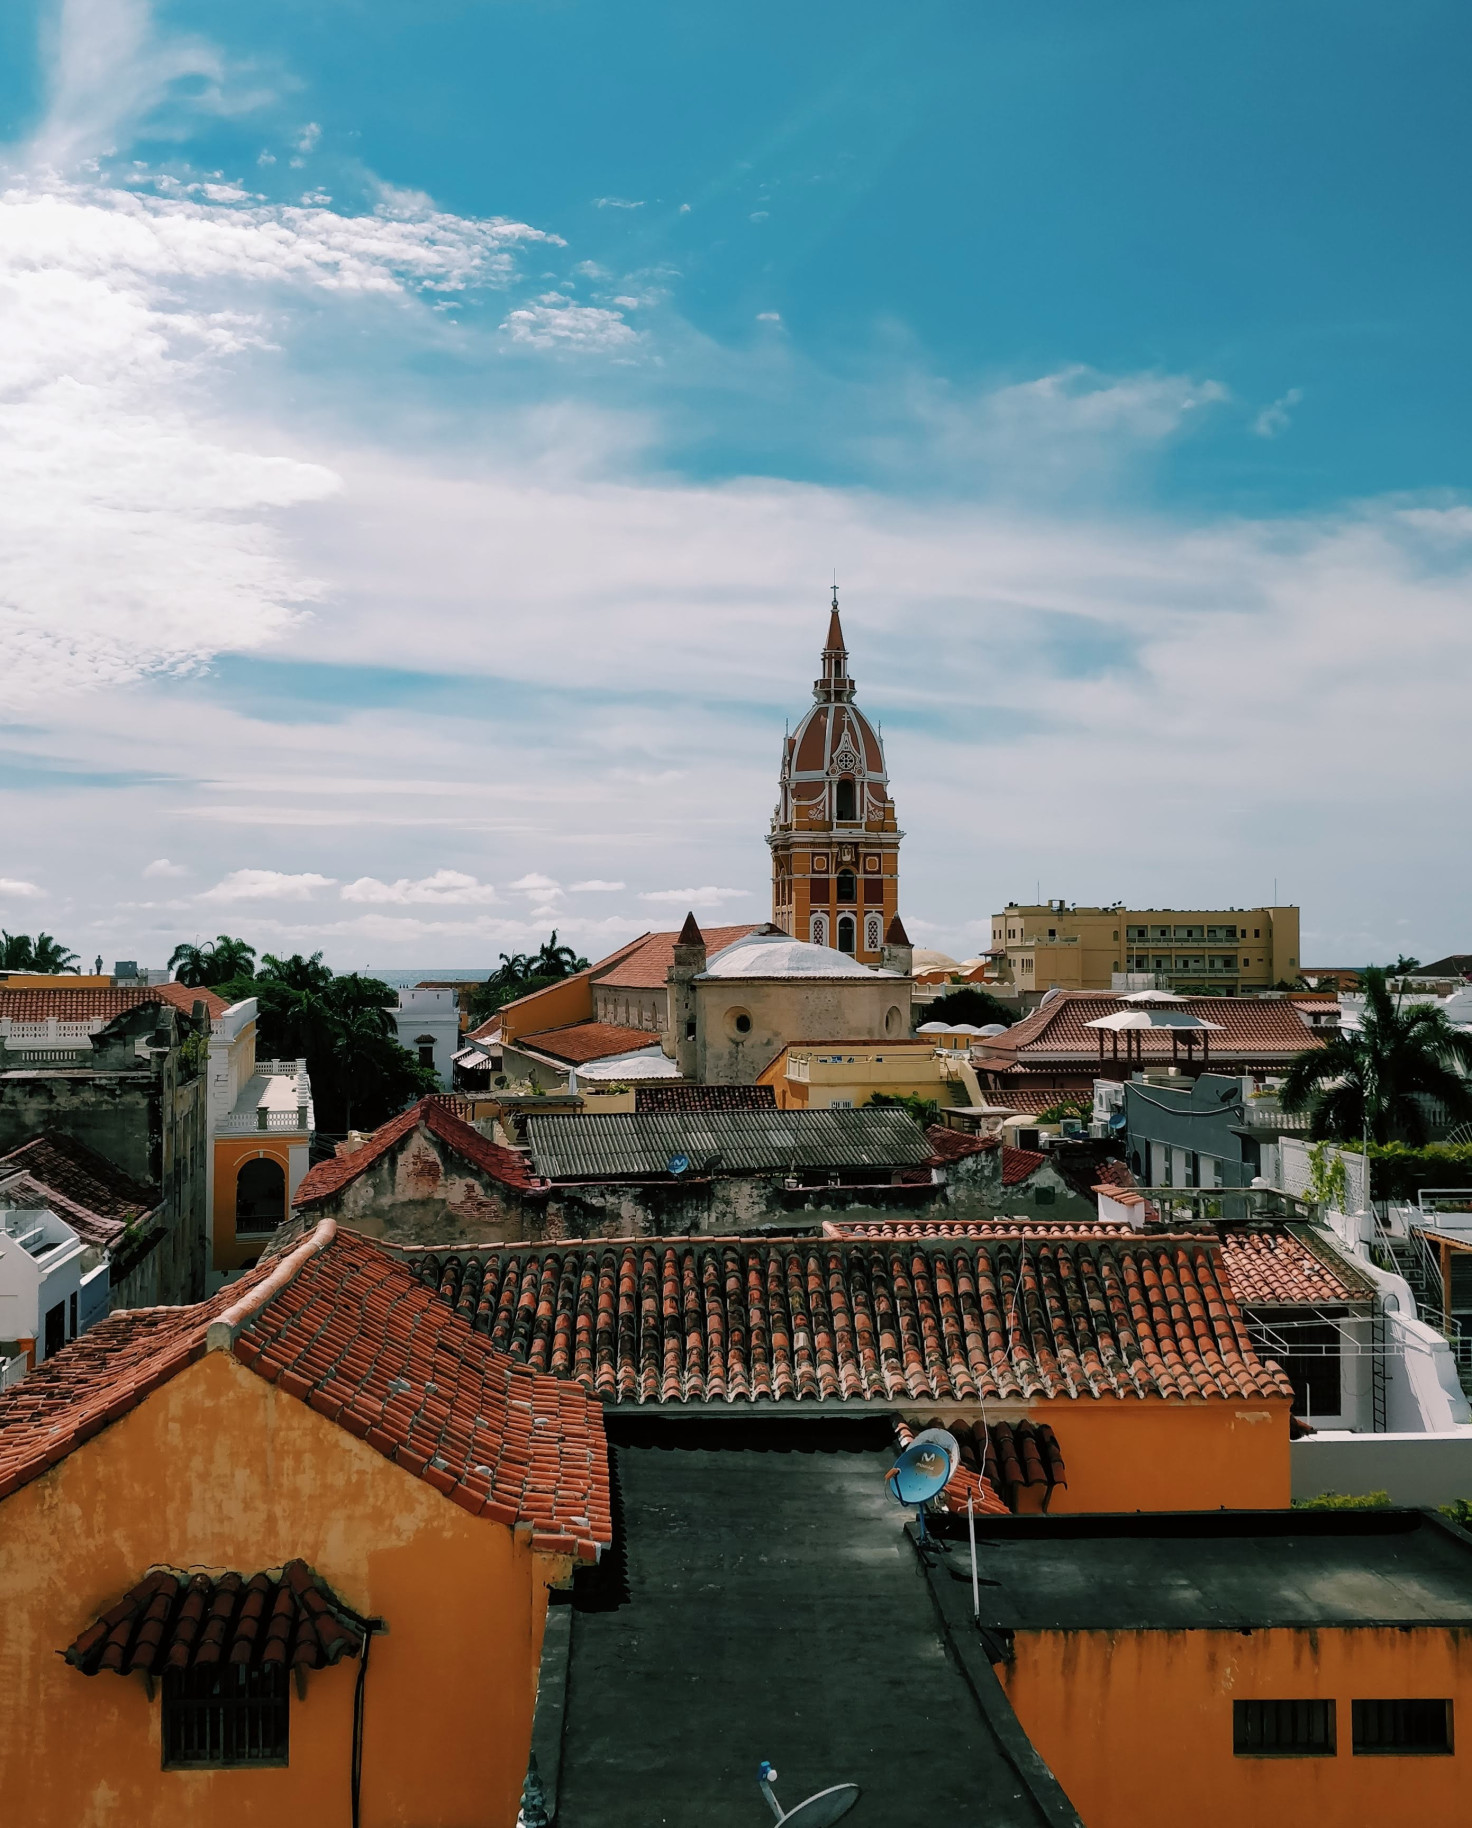 blue skies and white clouds with orange buildings and red roofs city view of Cartagena in Colombia